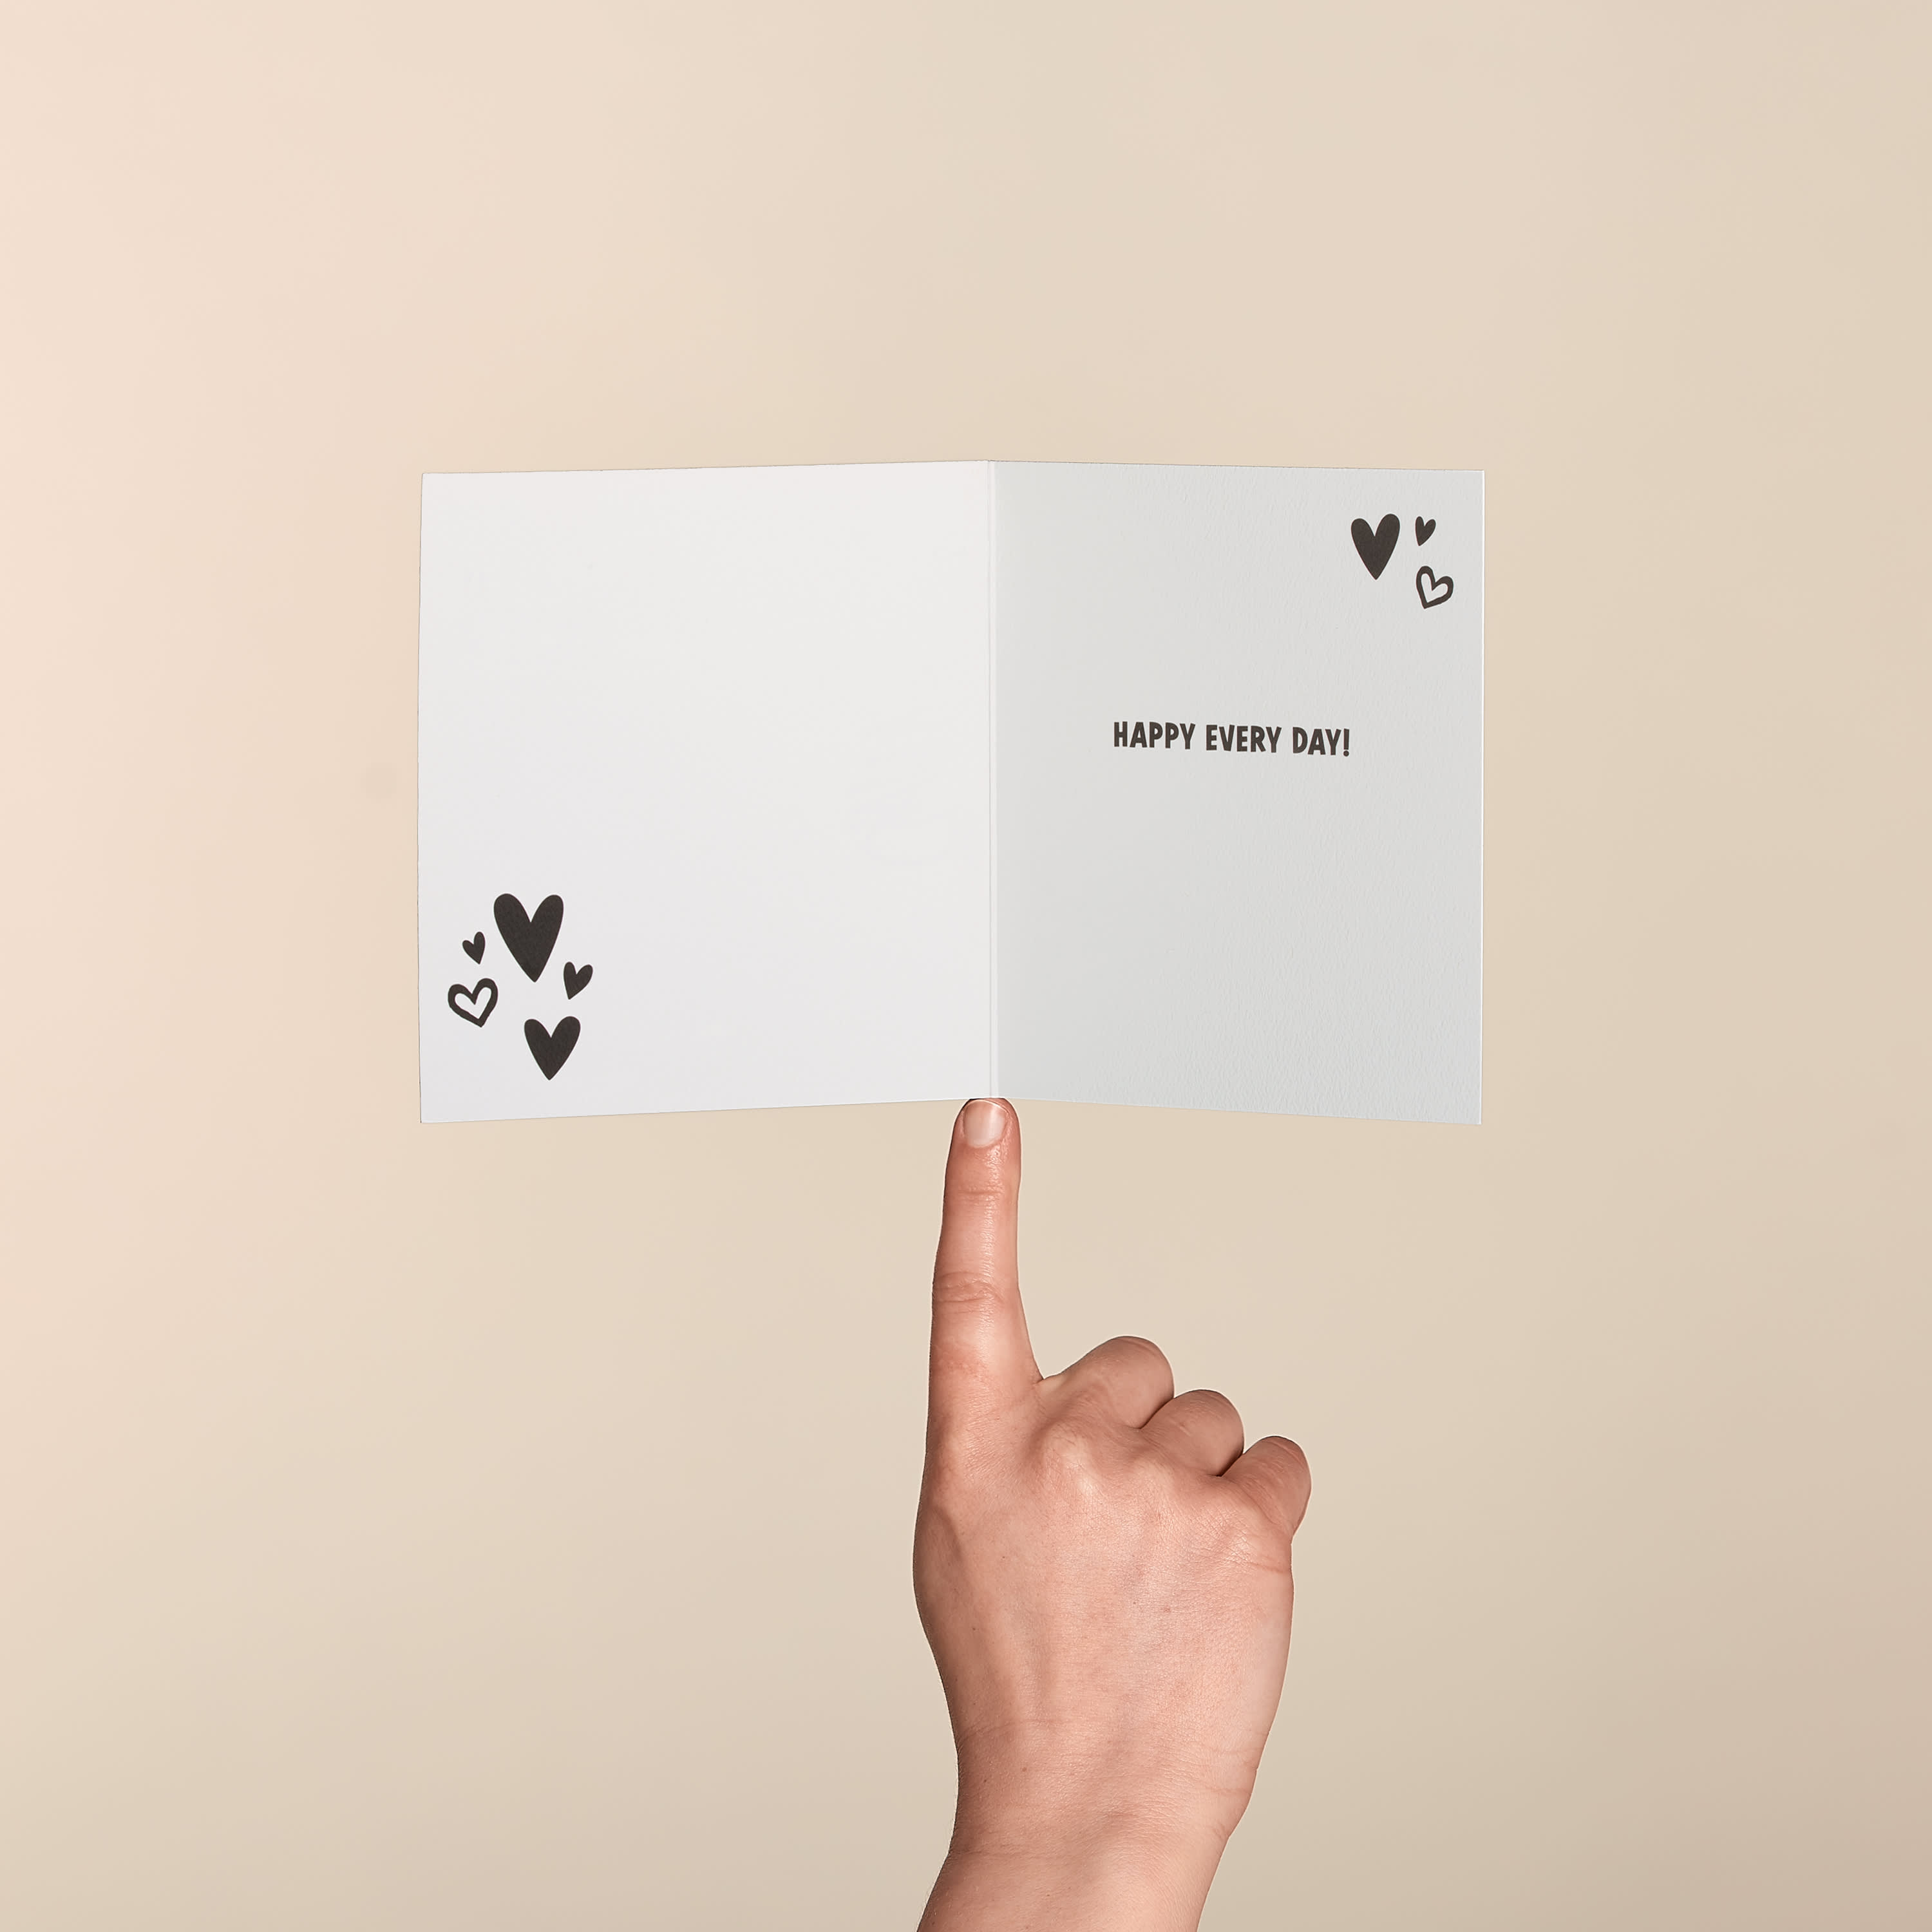 Puppies Valentine's Day Cards, 6-Count image